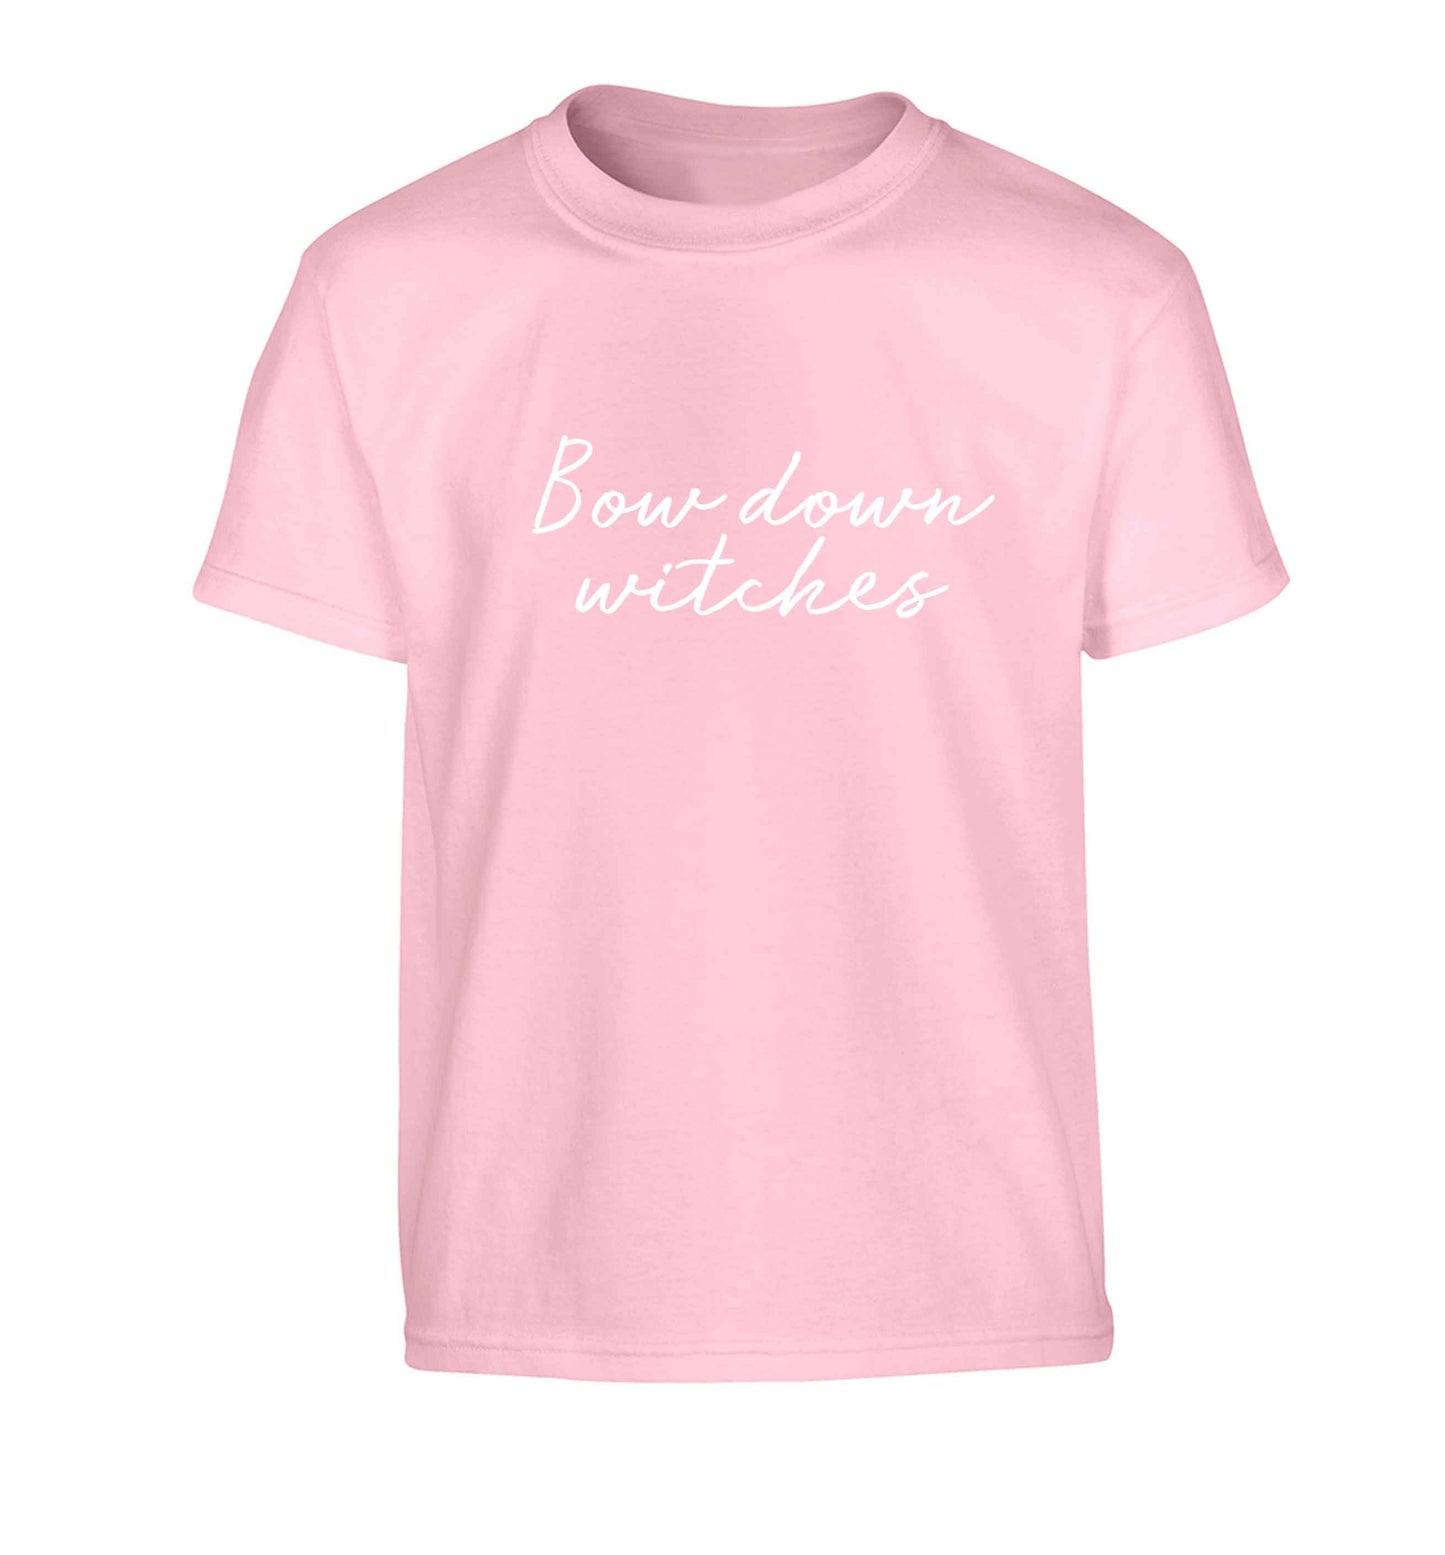 Bow down witches Children's light pink Tshirt 12-13 Years